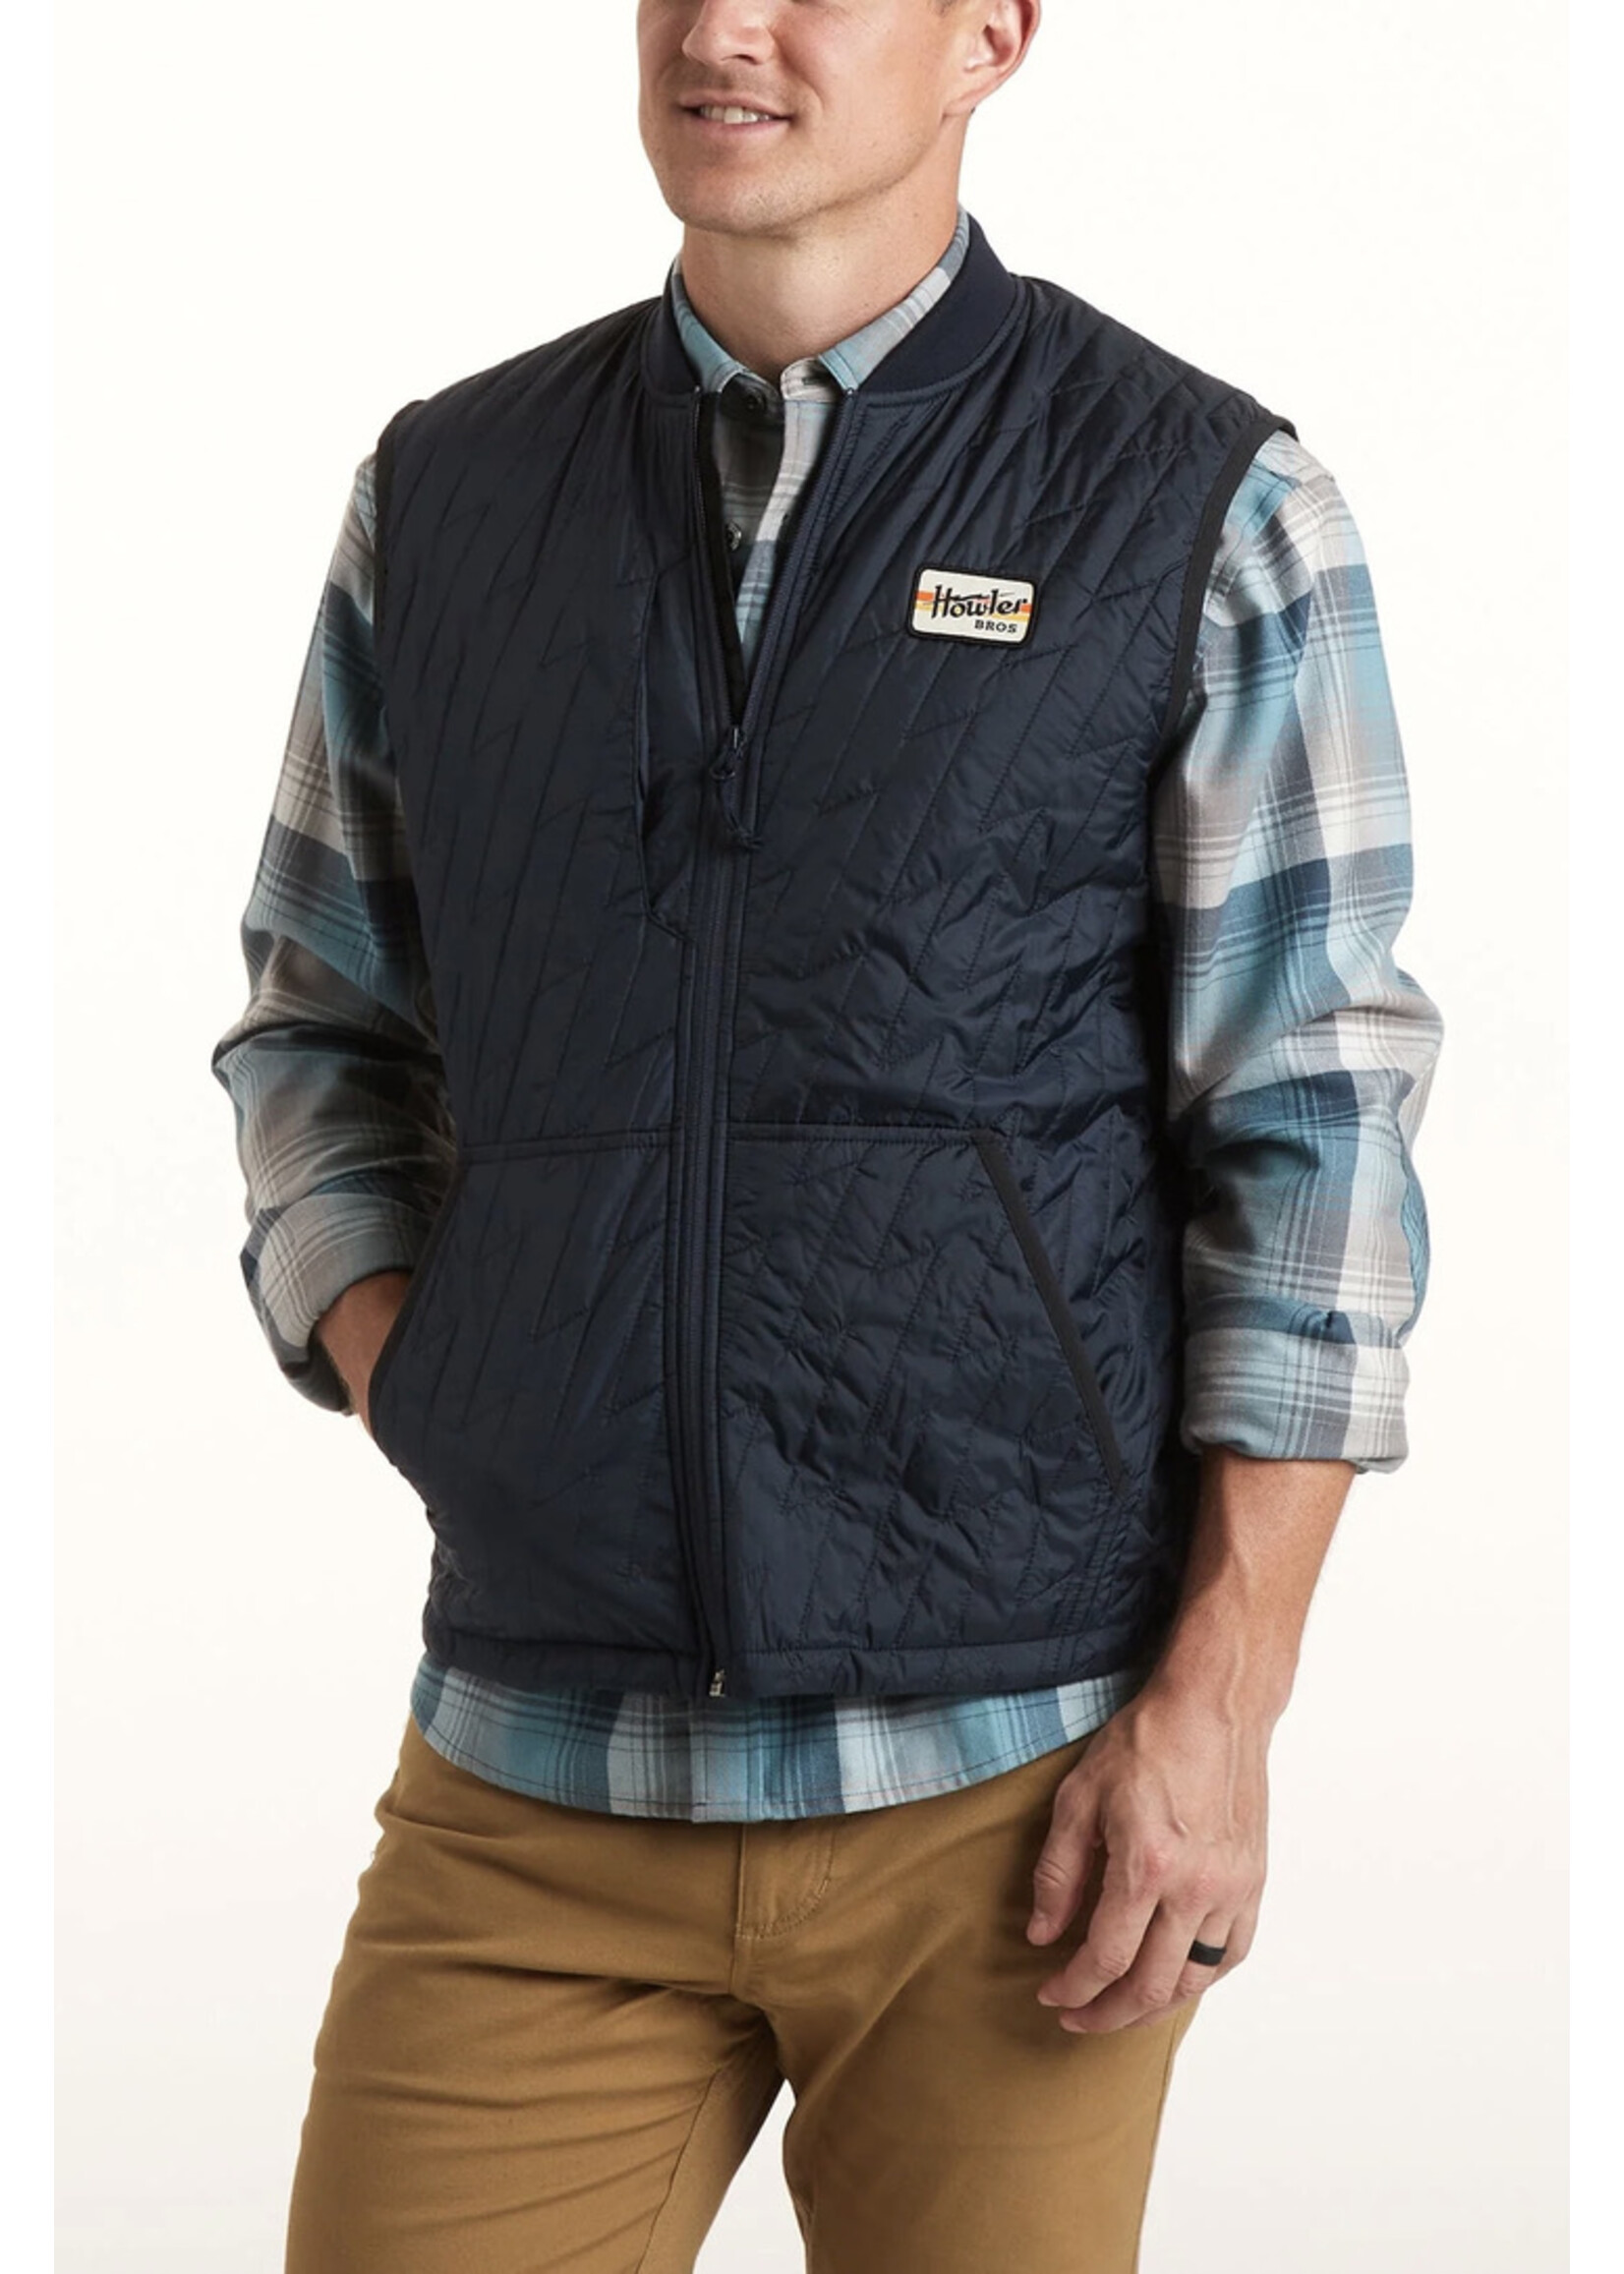 Howler Brothers Voltage Quilted Vest